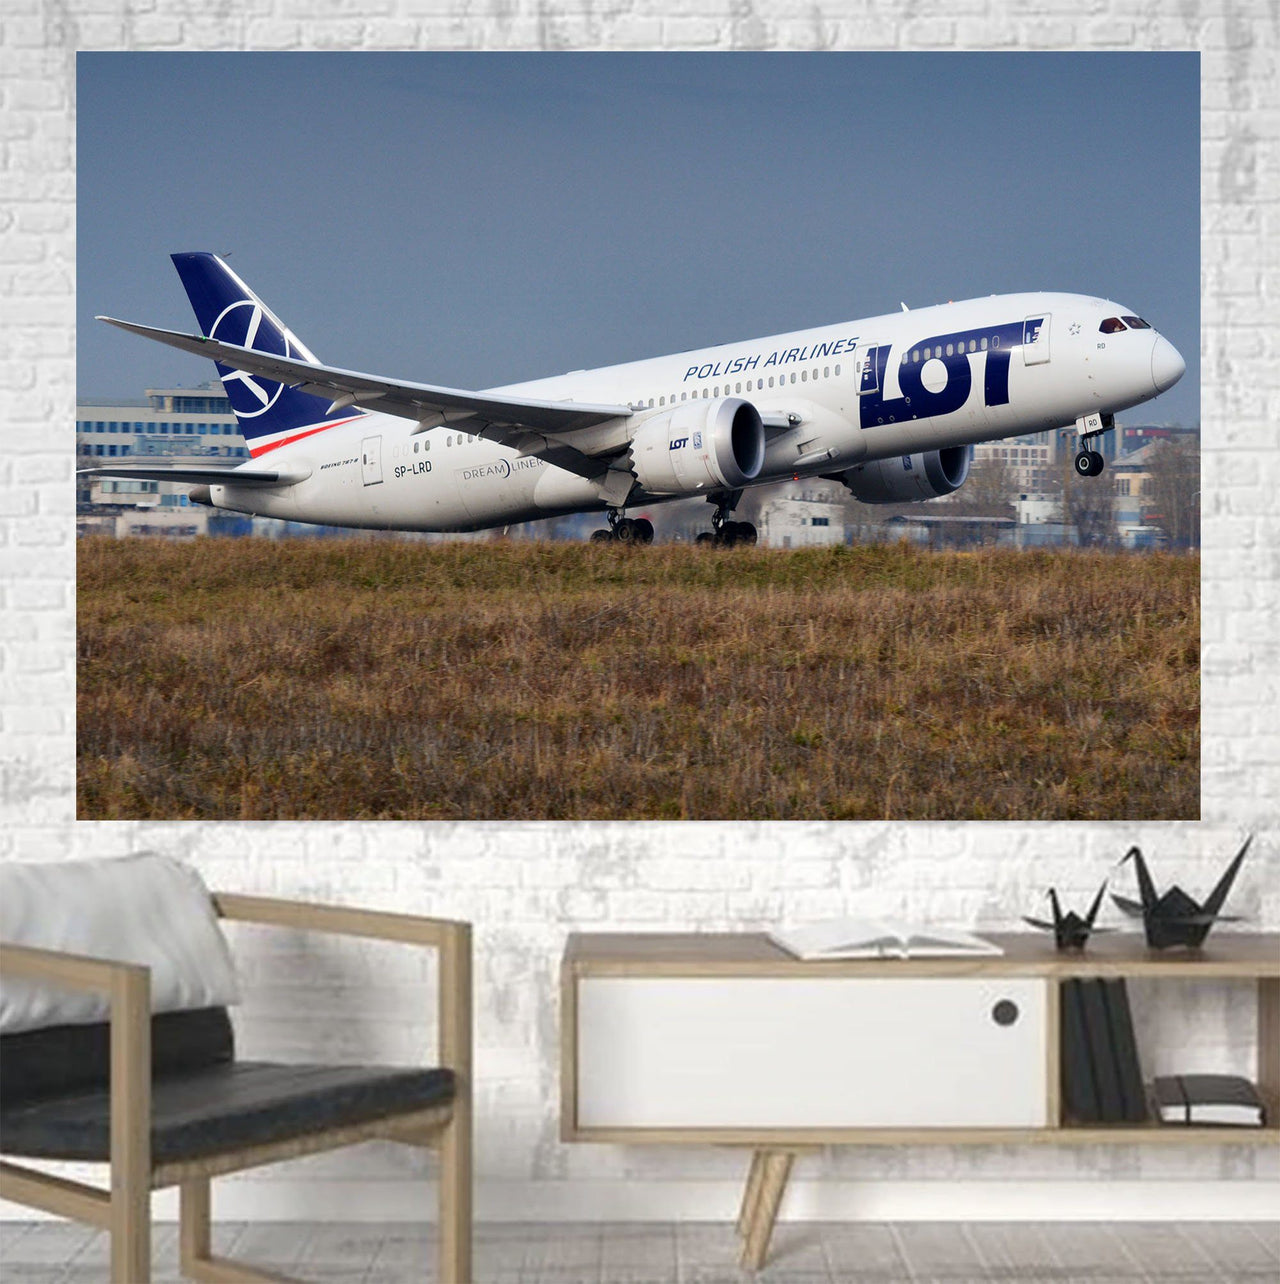 LOT Polish Airlines Boeing 787 Printed Canvas Posters (1 Piece) Aviation Shop 